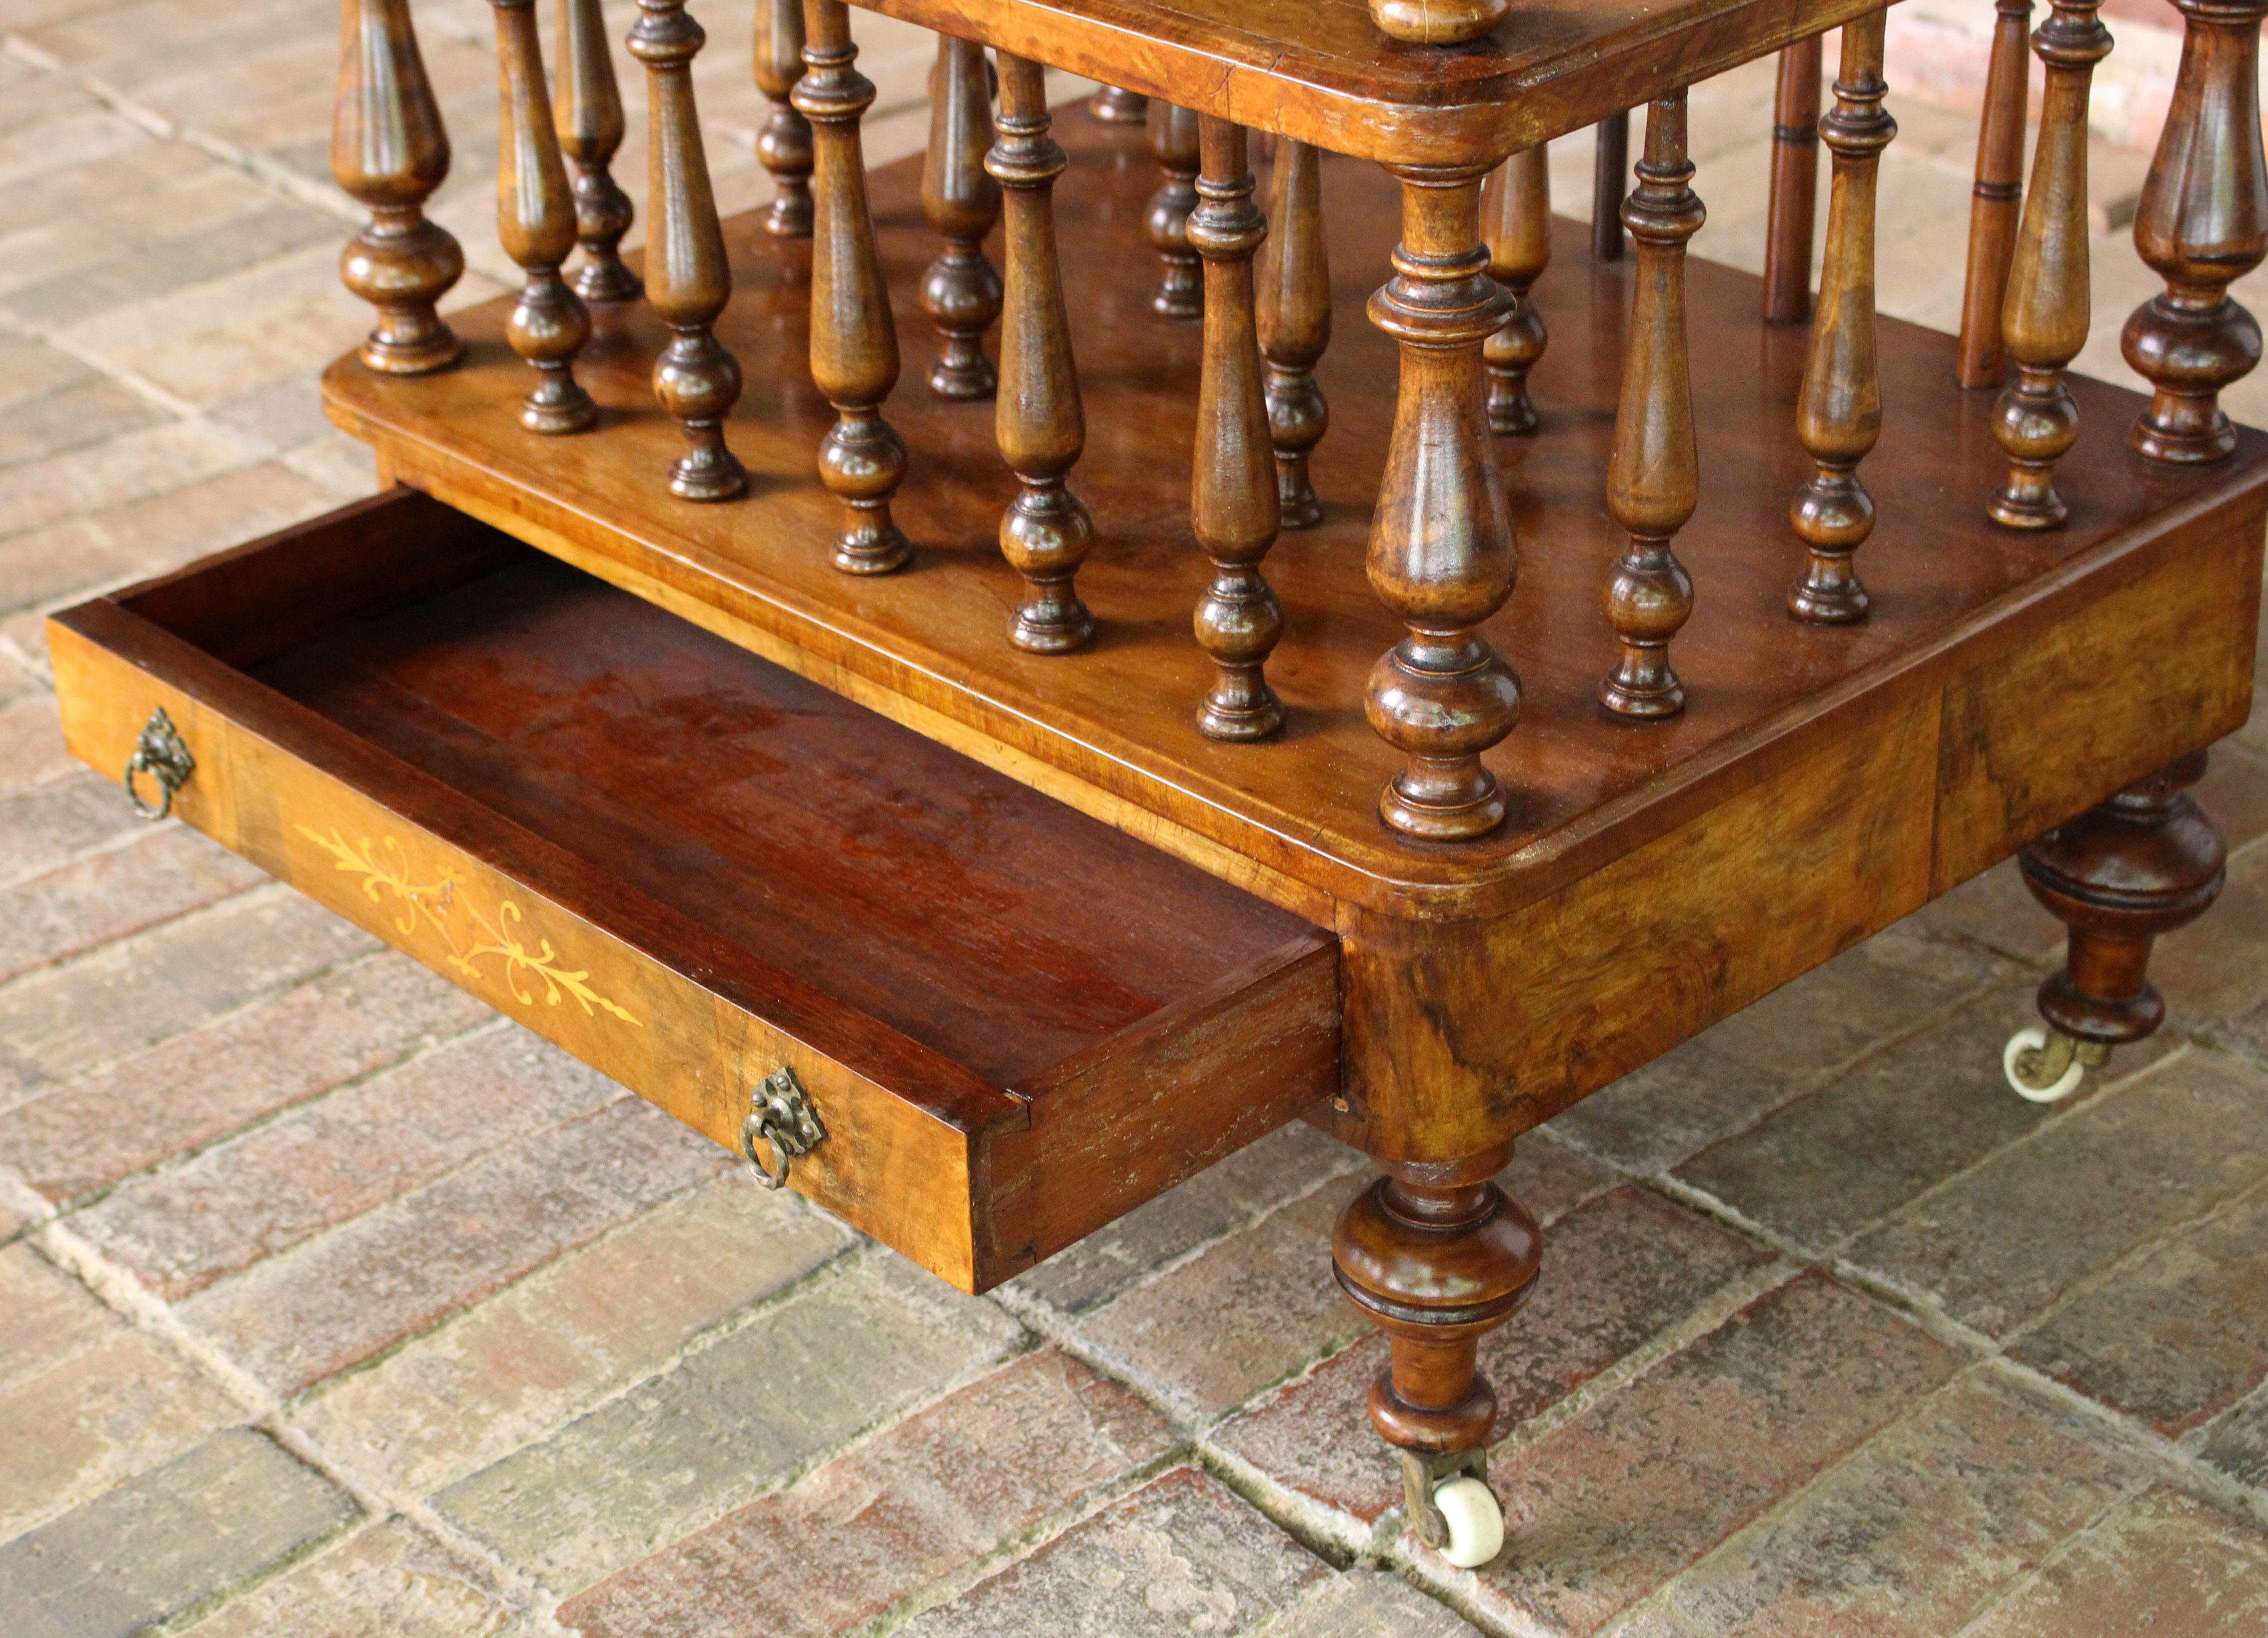 Circa 1865-85 Burl Walnut Canterbury Stand Table In Good Condition For Sale In Chapel Hill, NC